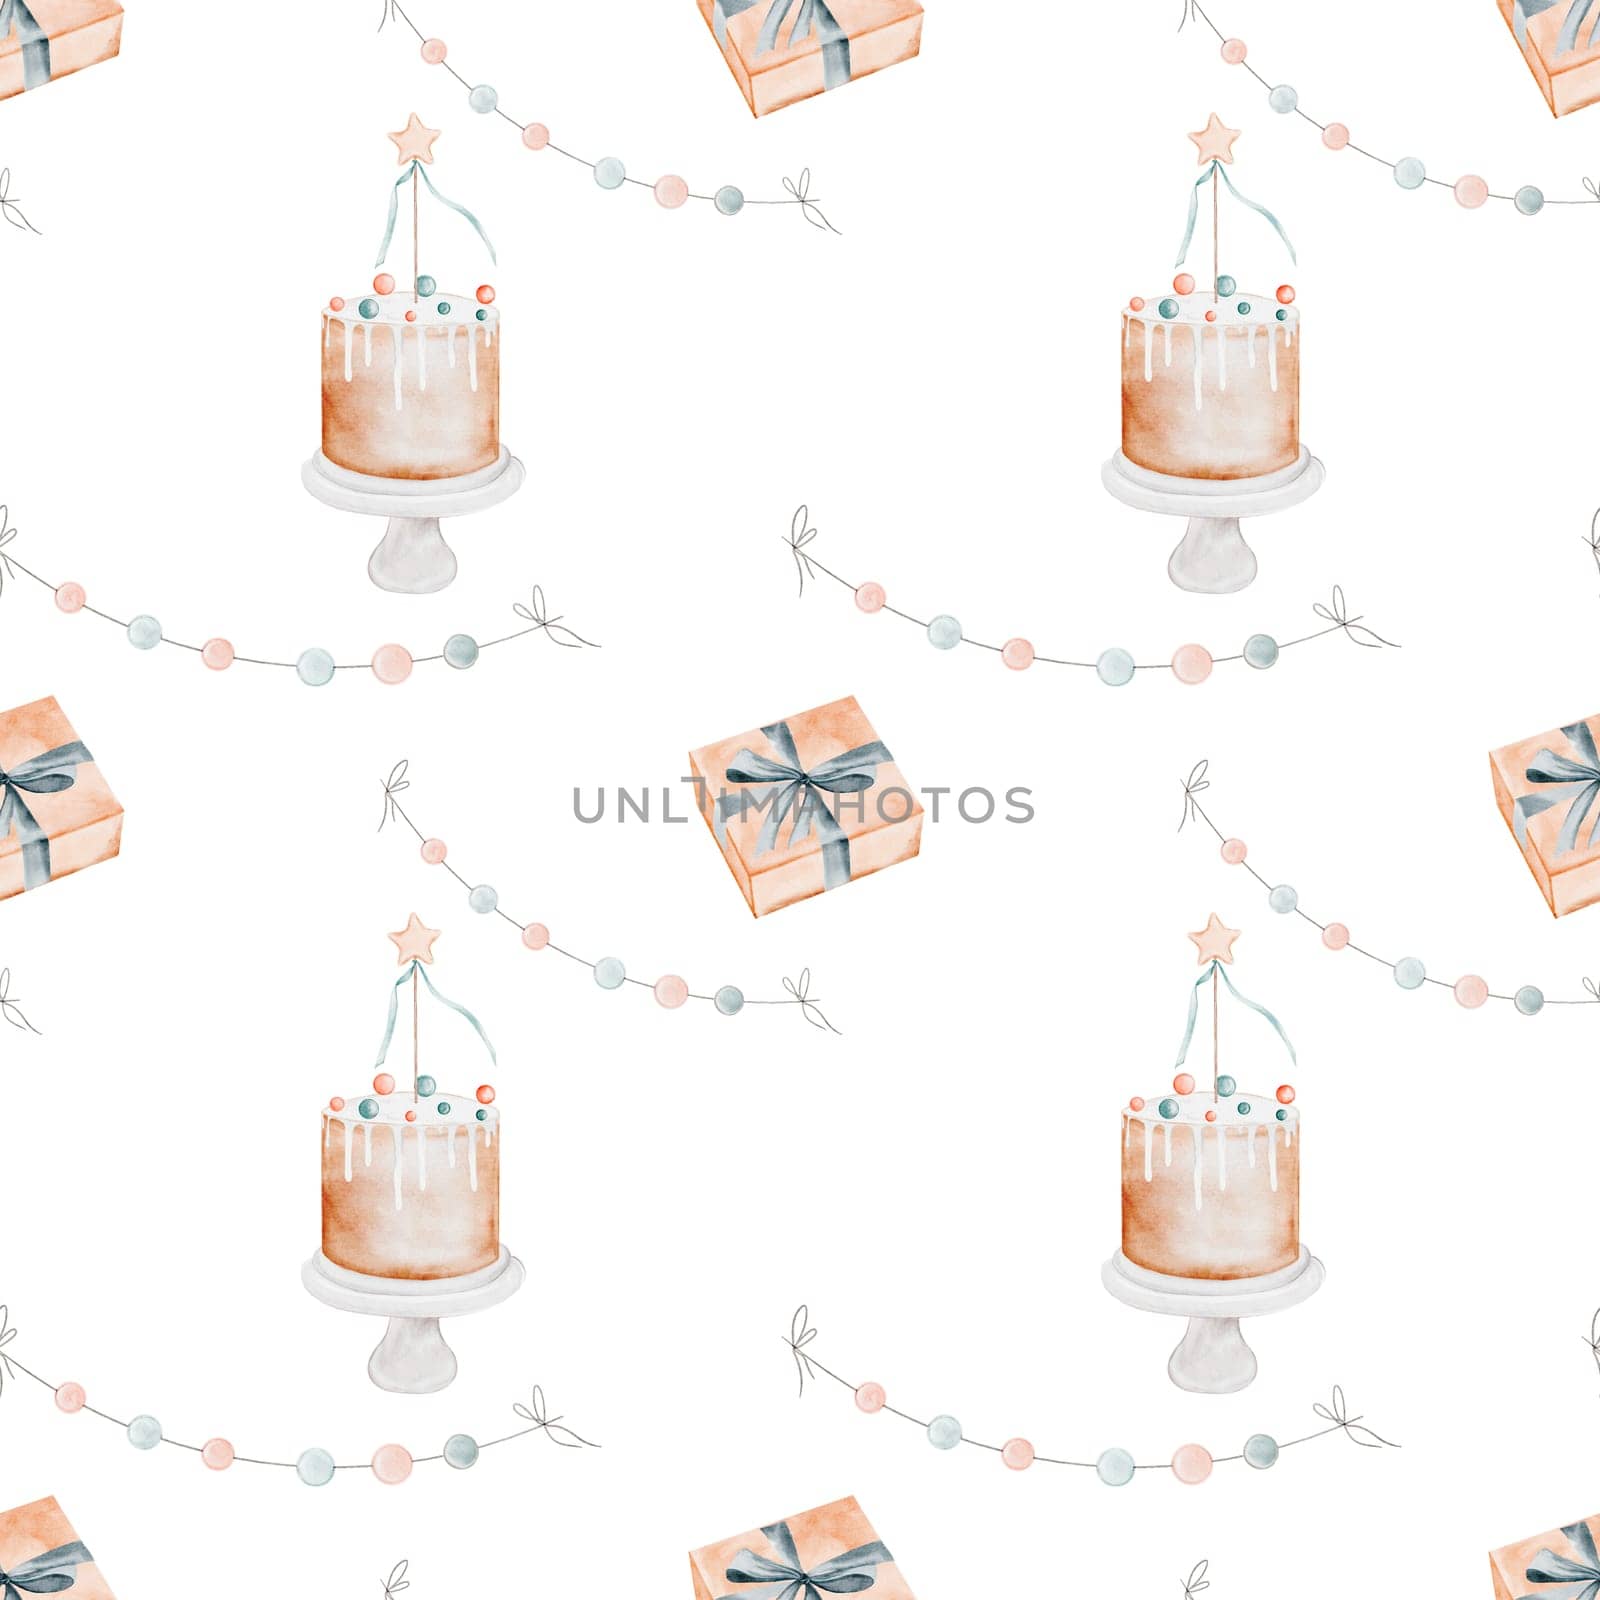 Birthday pattern watercolor. Seamless holiday illustration with cake and gift boxes, garlands. Ideal for holiday decoration, baby shower, printing on children's textiles. High quality illustration